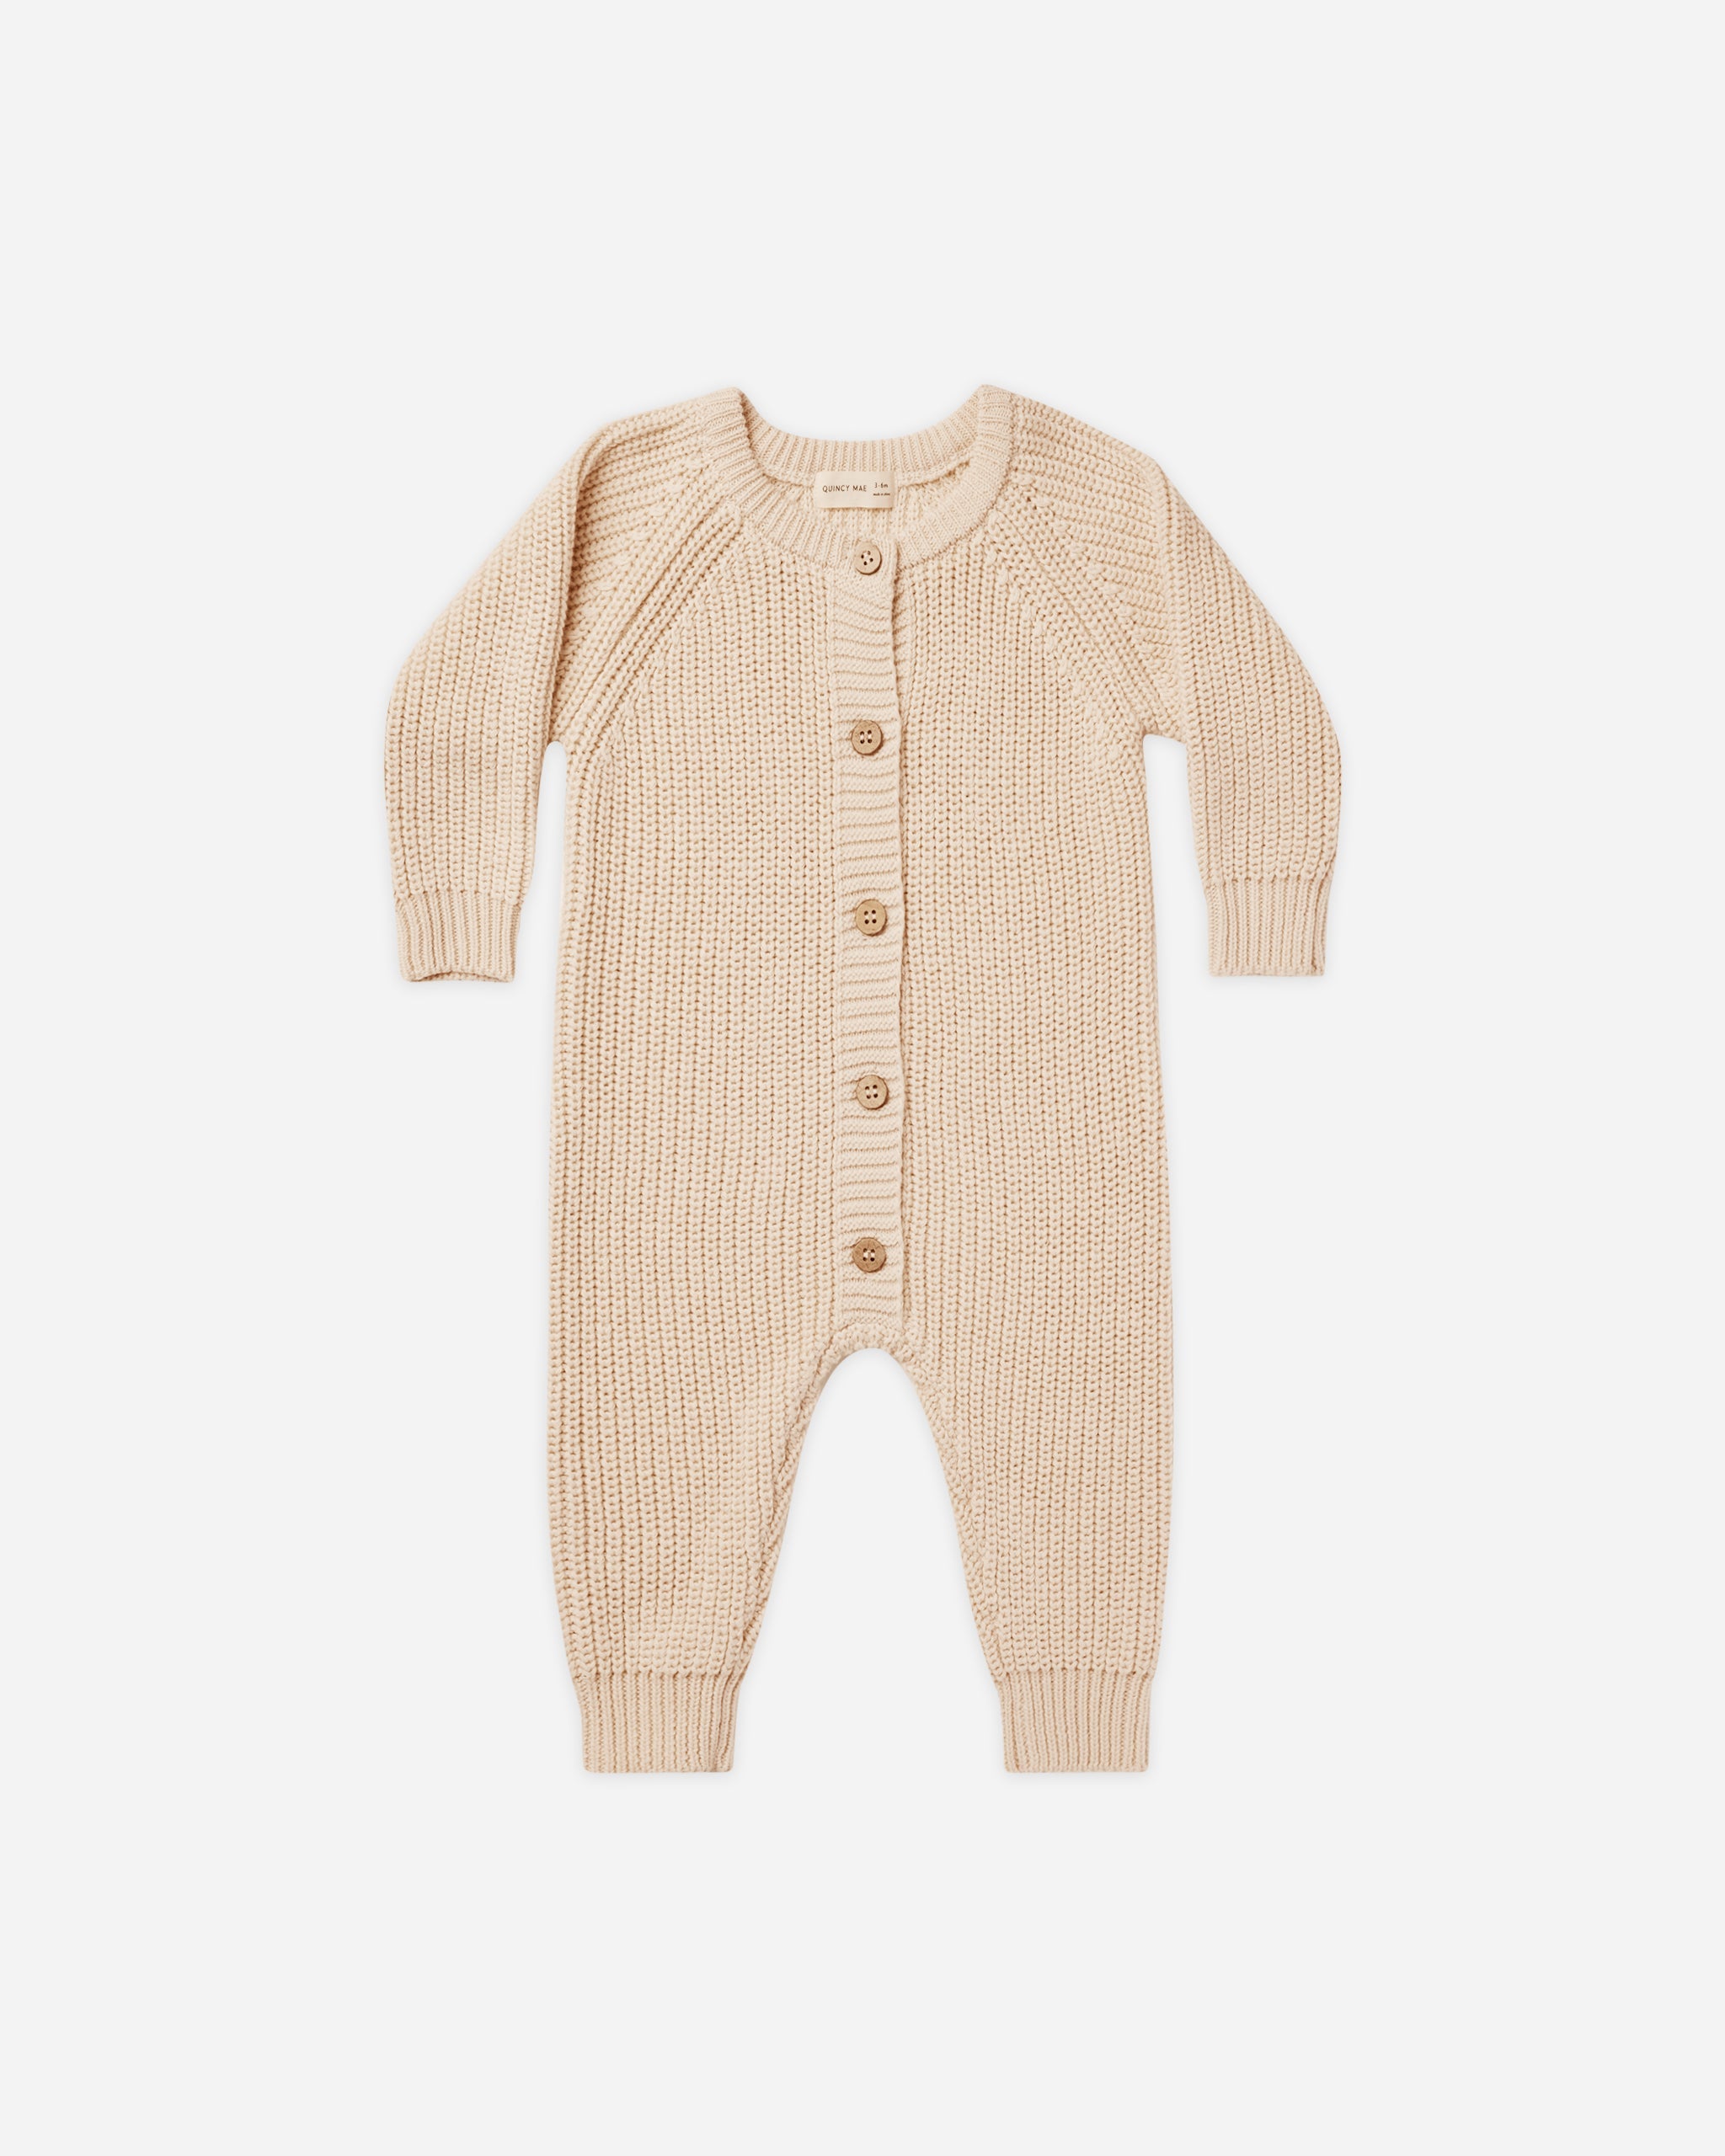 Chunky Knit Jumpsuit || Shell - Rylee + Cru | Kids Clothes | Trendy Baby Clothes | Modern Infant Outfits |